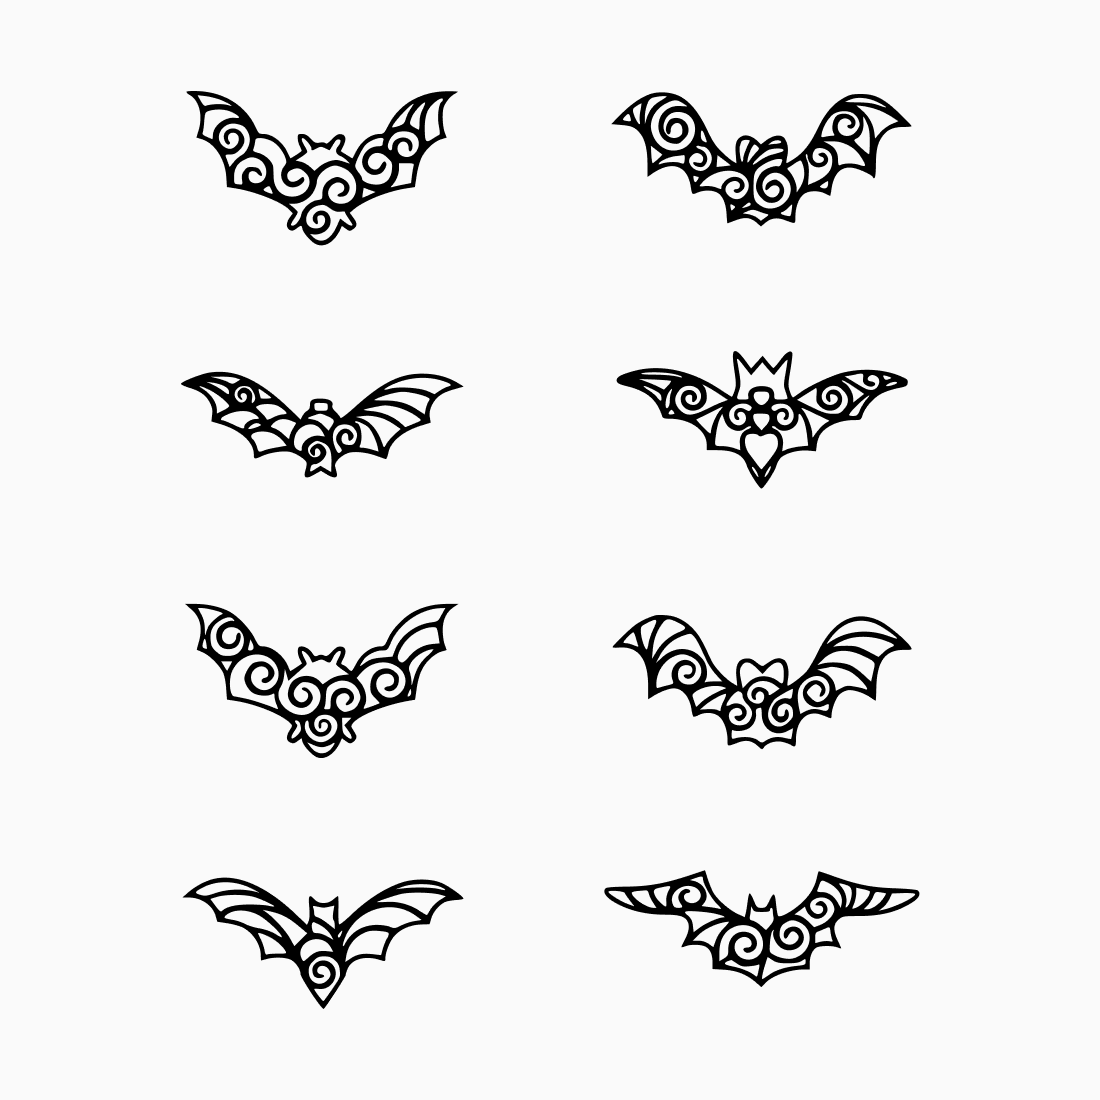 Set of nine bats with different designs.